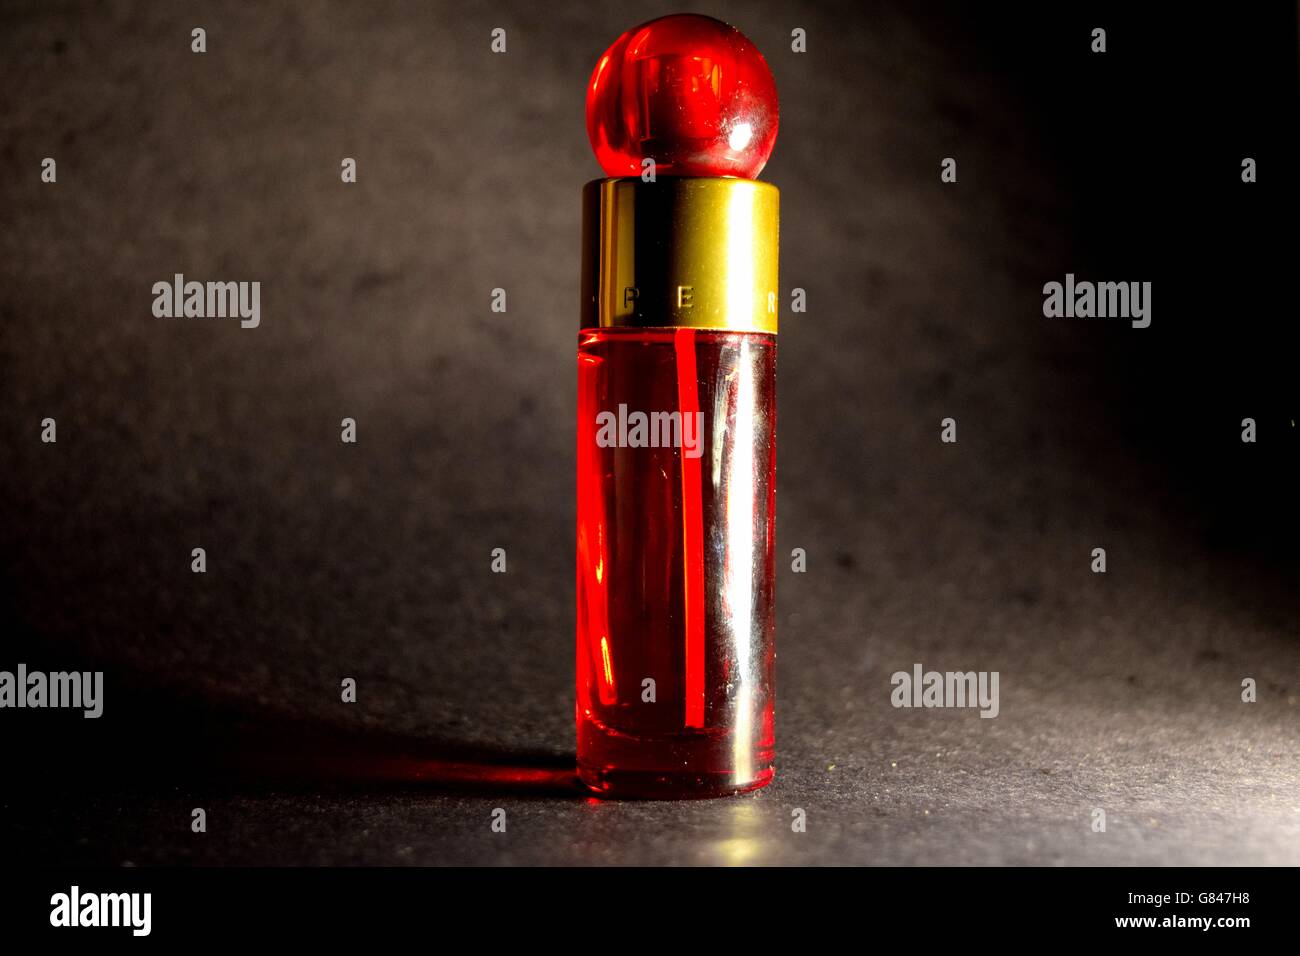 Perfume, Perfume Atomizer, Bottle, Scented, No People, Red, Spray, Antique, Plain Background, White Background, Colour Image, Fo Stock Photo